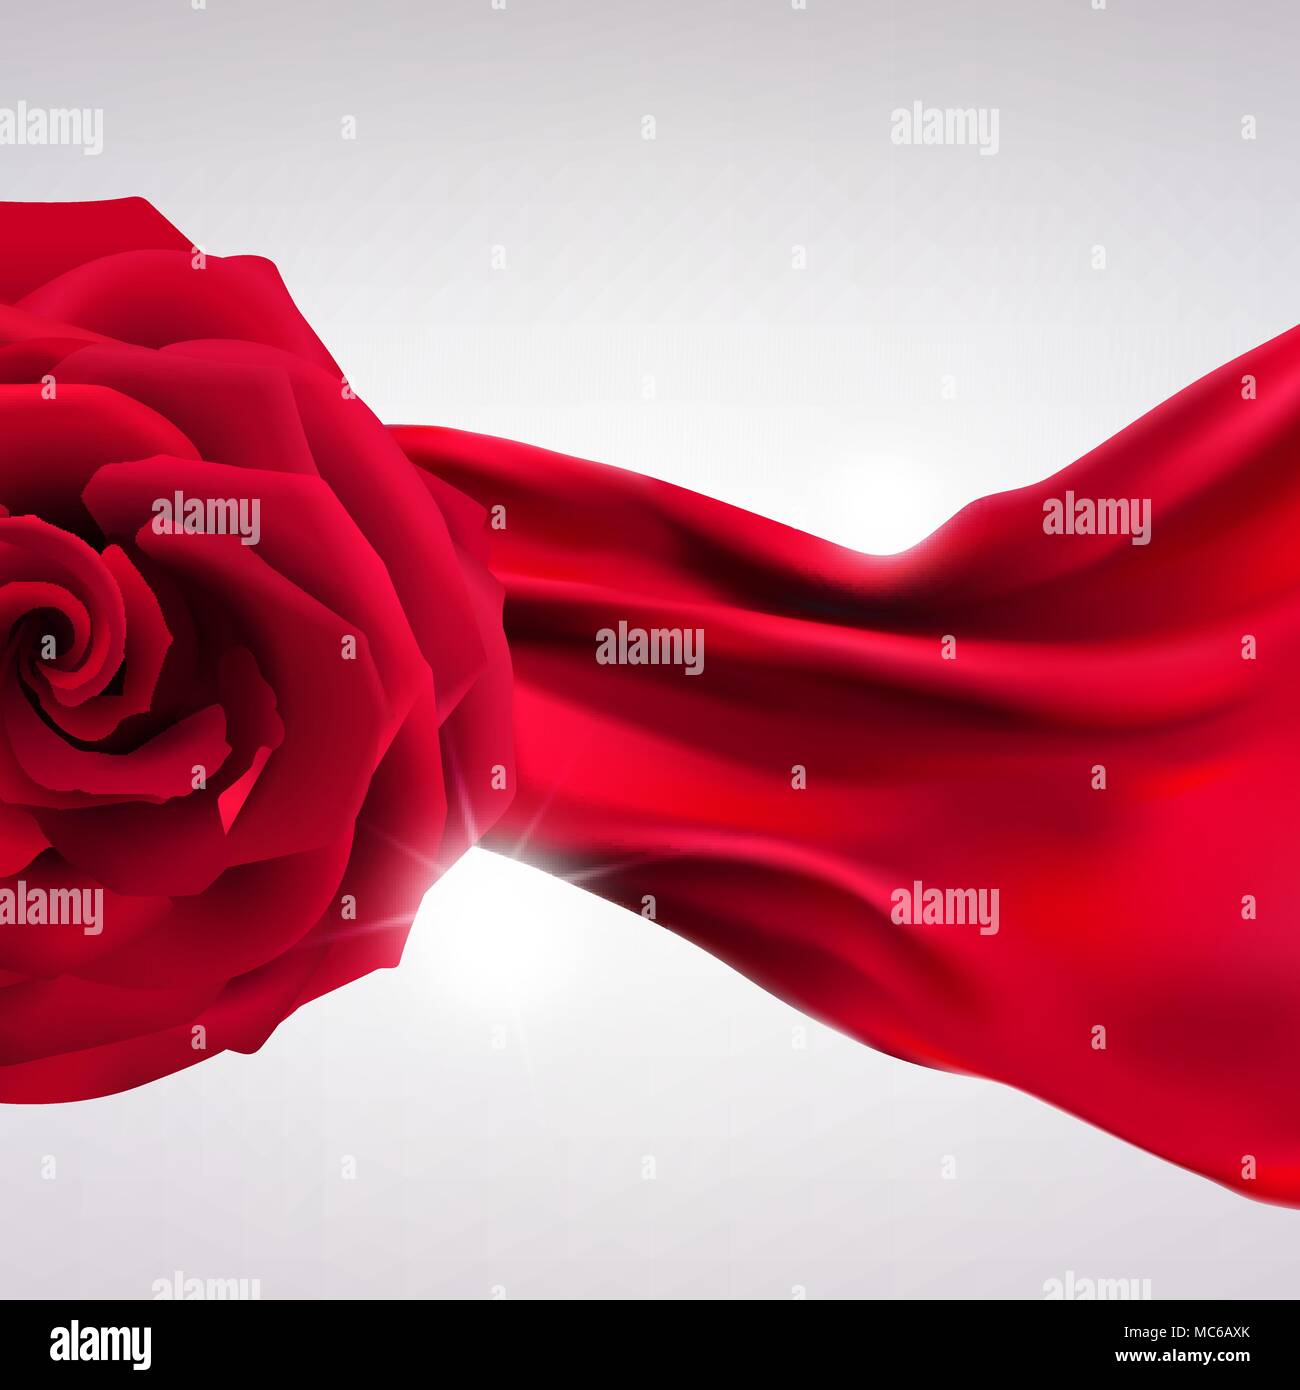 red rose on background of waves of fabric folds Stock Vector